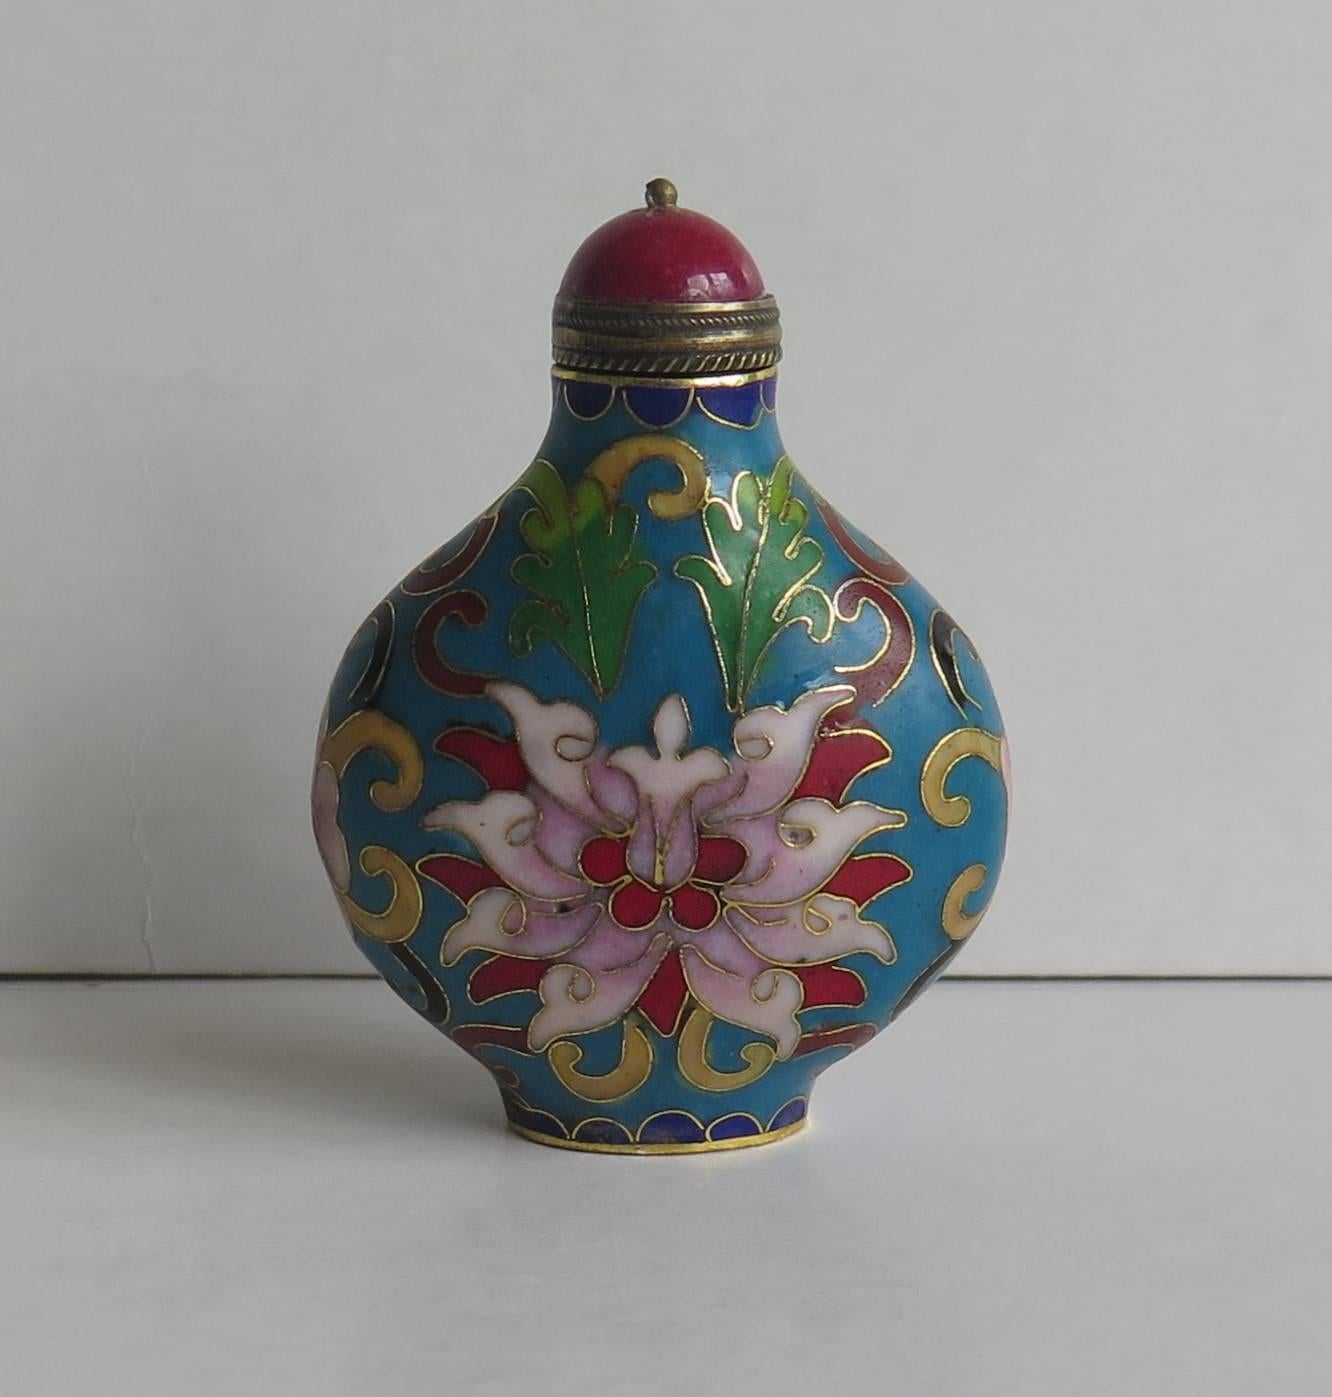 This is a very good example of a Chinese snuff bottle, made from cloisonné with hand enameled decoration.

The main decoration is of a large central stylized Lotus flower set within leaves with a similar flower to the reverse and small flowers to